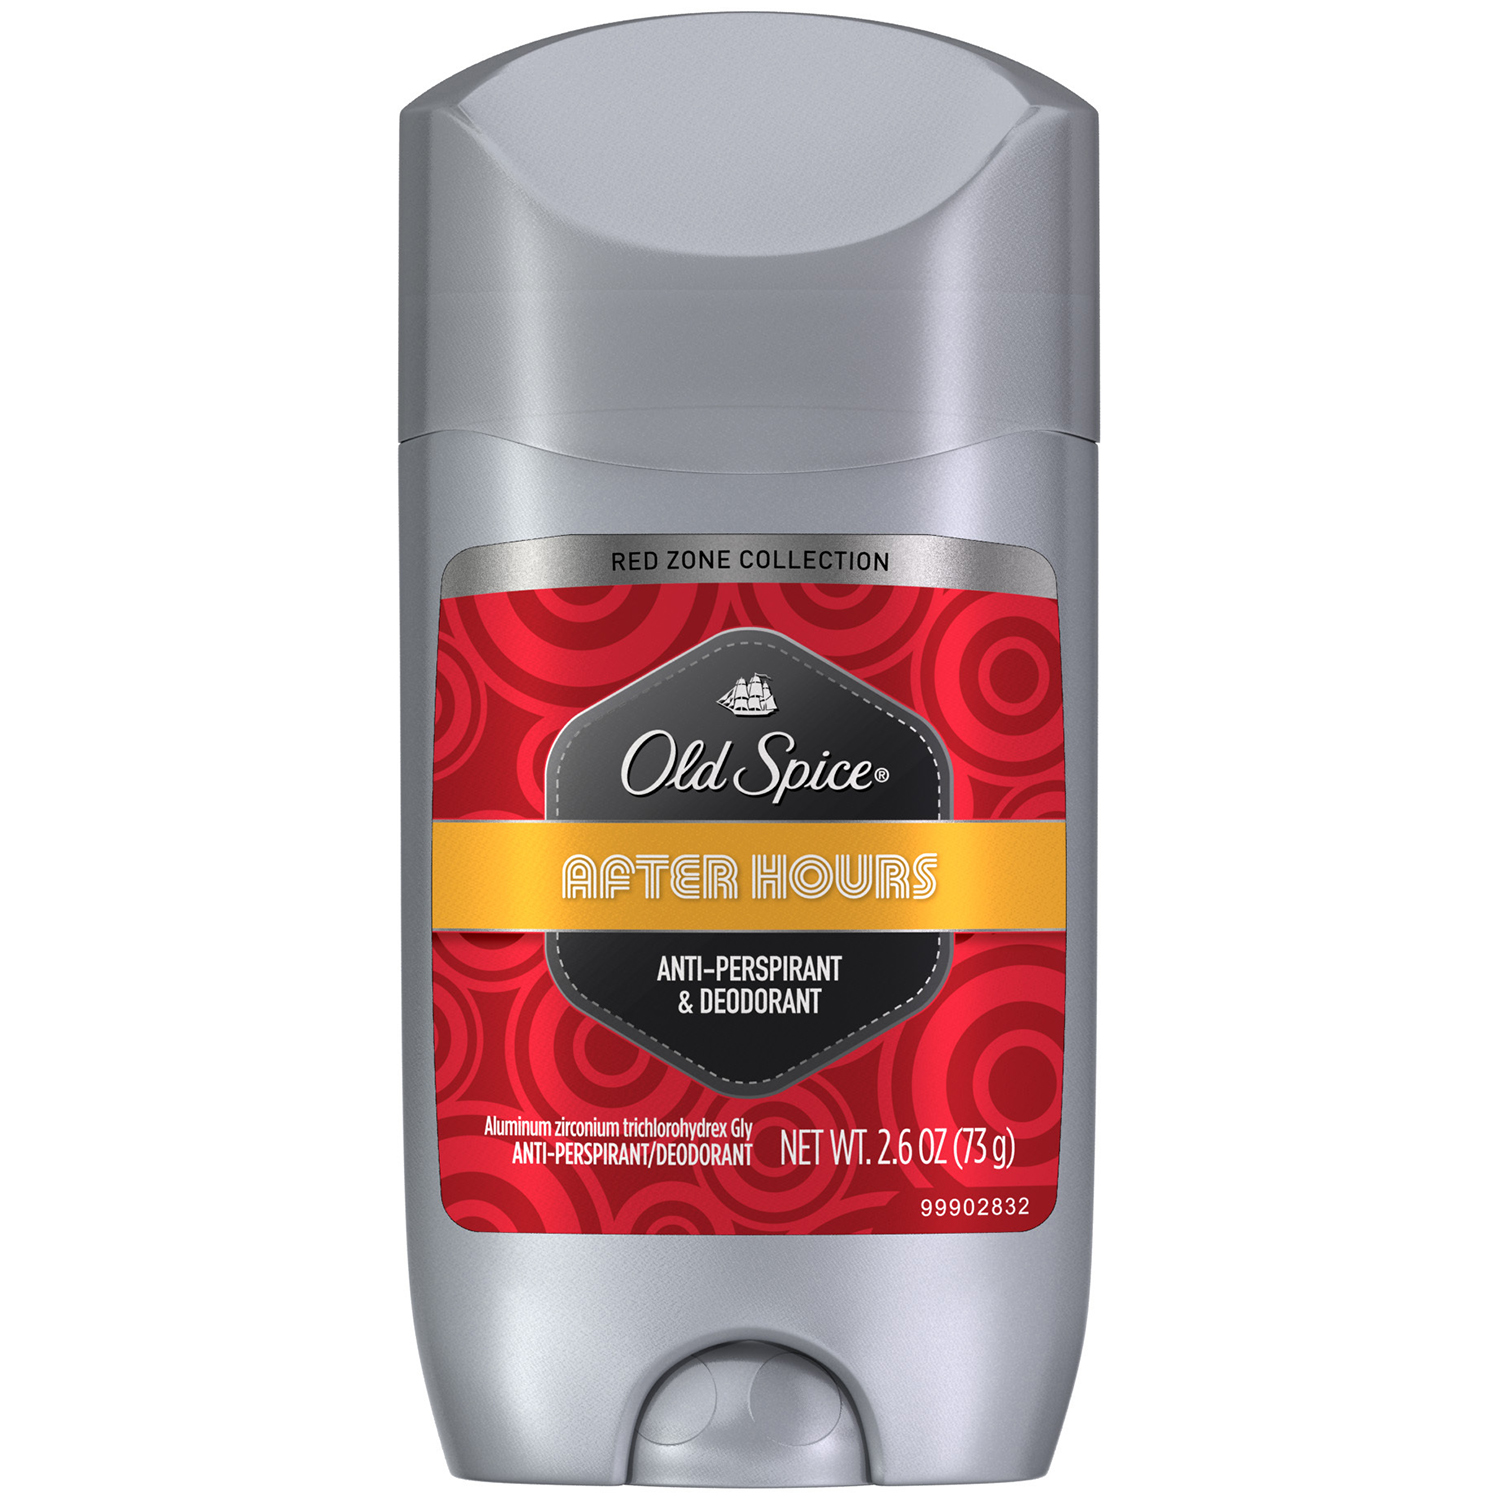 Old Spice Red Zone Collection Anti-Perspirant/Deodorant, After Hours, 2.6 oz (73 g)